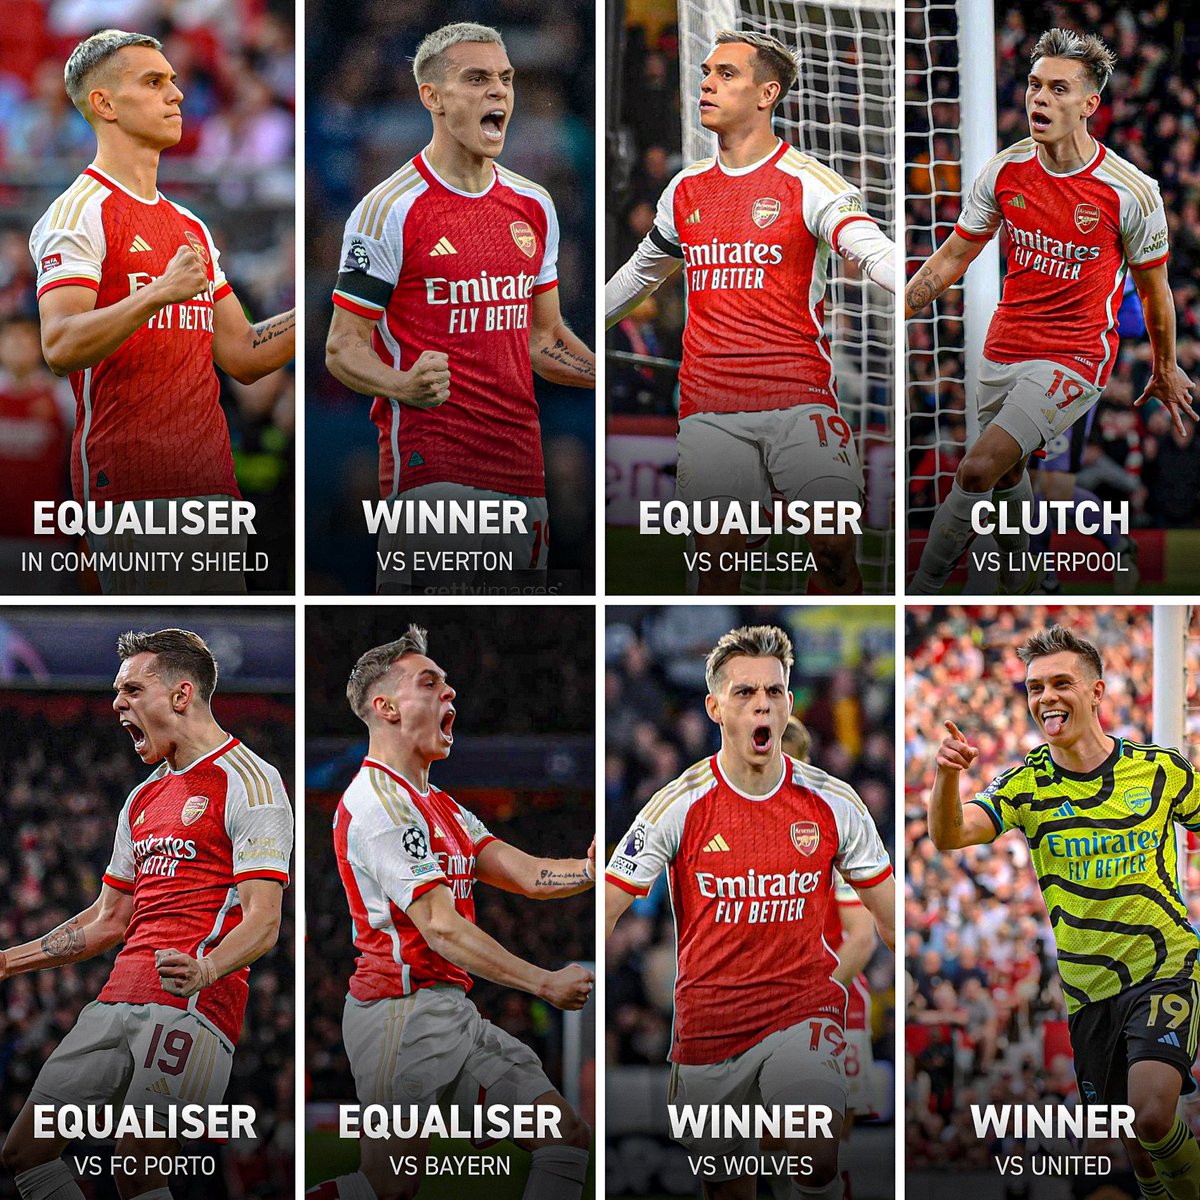 Without Leandro Trossard Arsenal’s season would look incredibly different.

🏆 Equaliser against City in the last minute to win Arsenal the Community Shield.

⚽️ Scored the winner against Everton and a late equaliser against Chelsea early on in the season.

🔝 Scored the third…